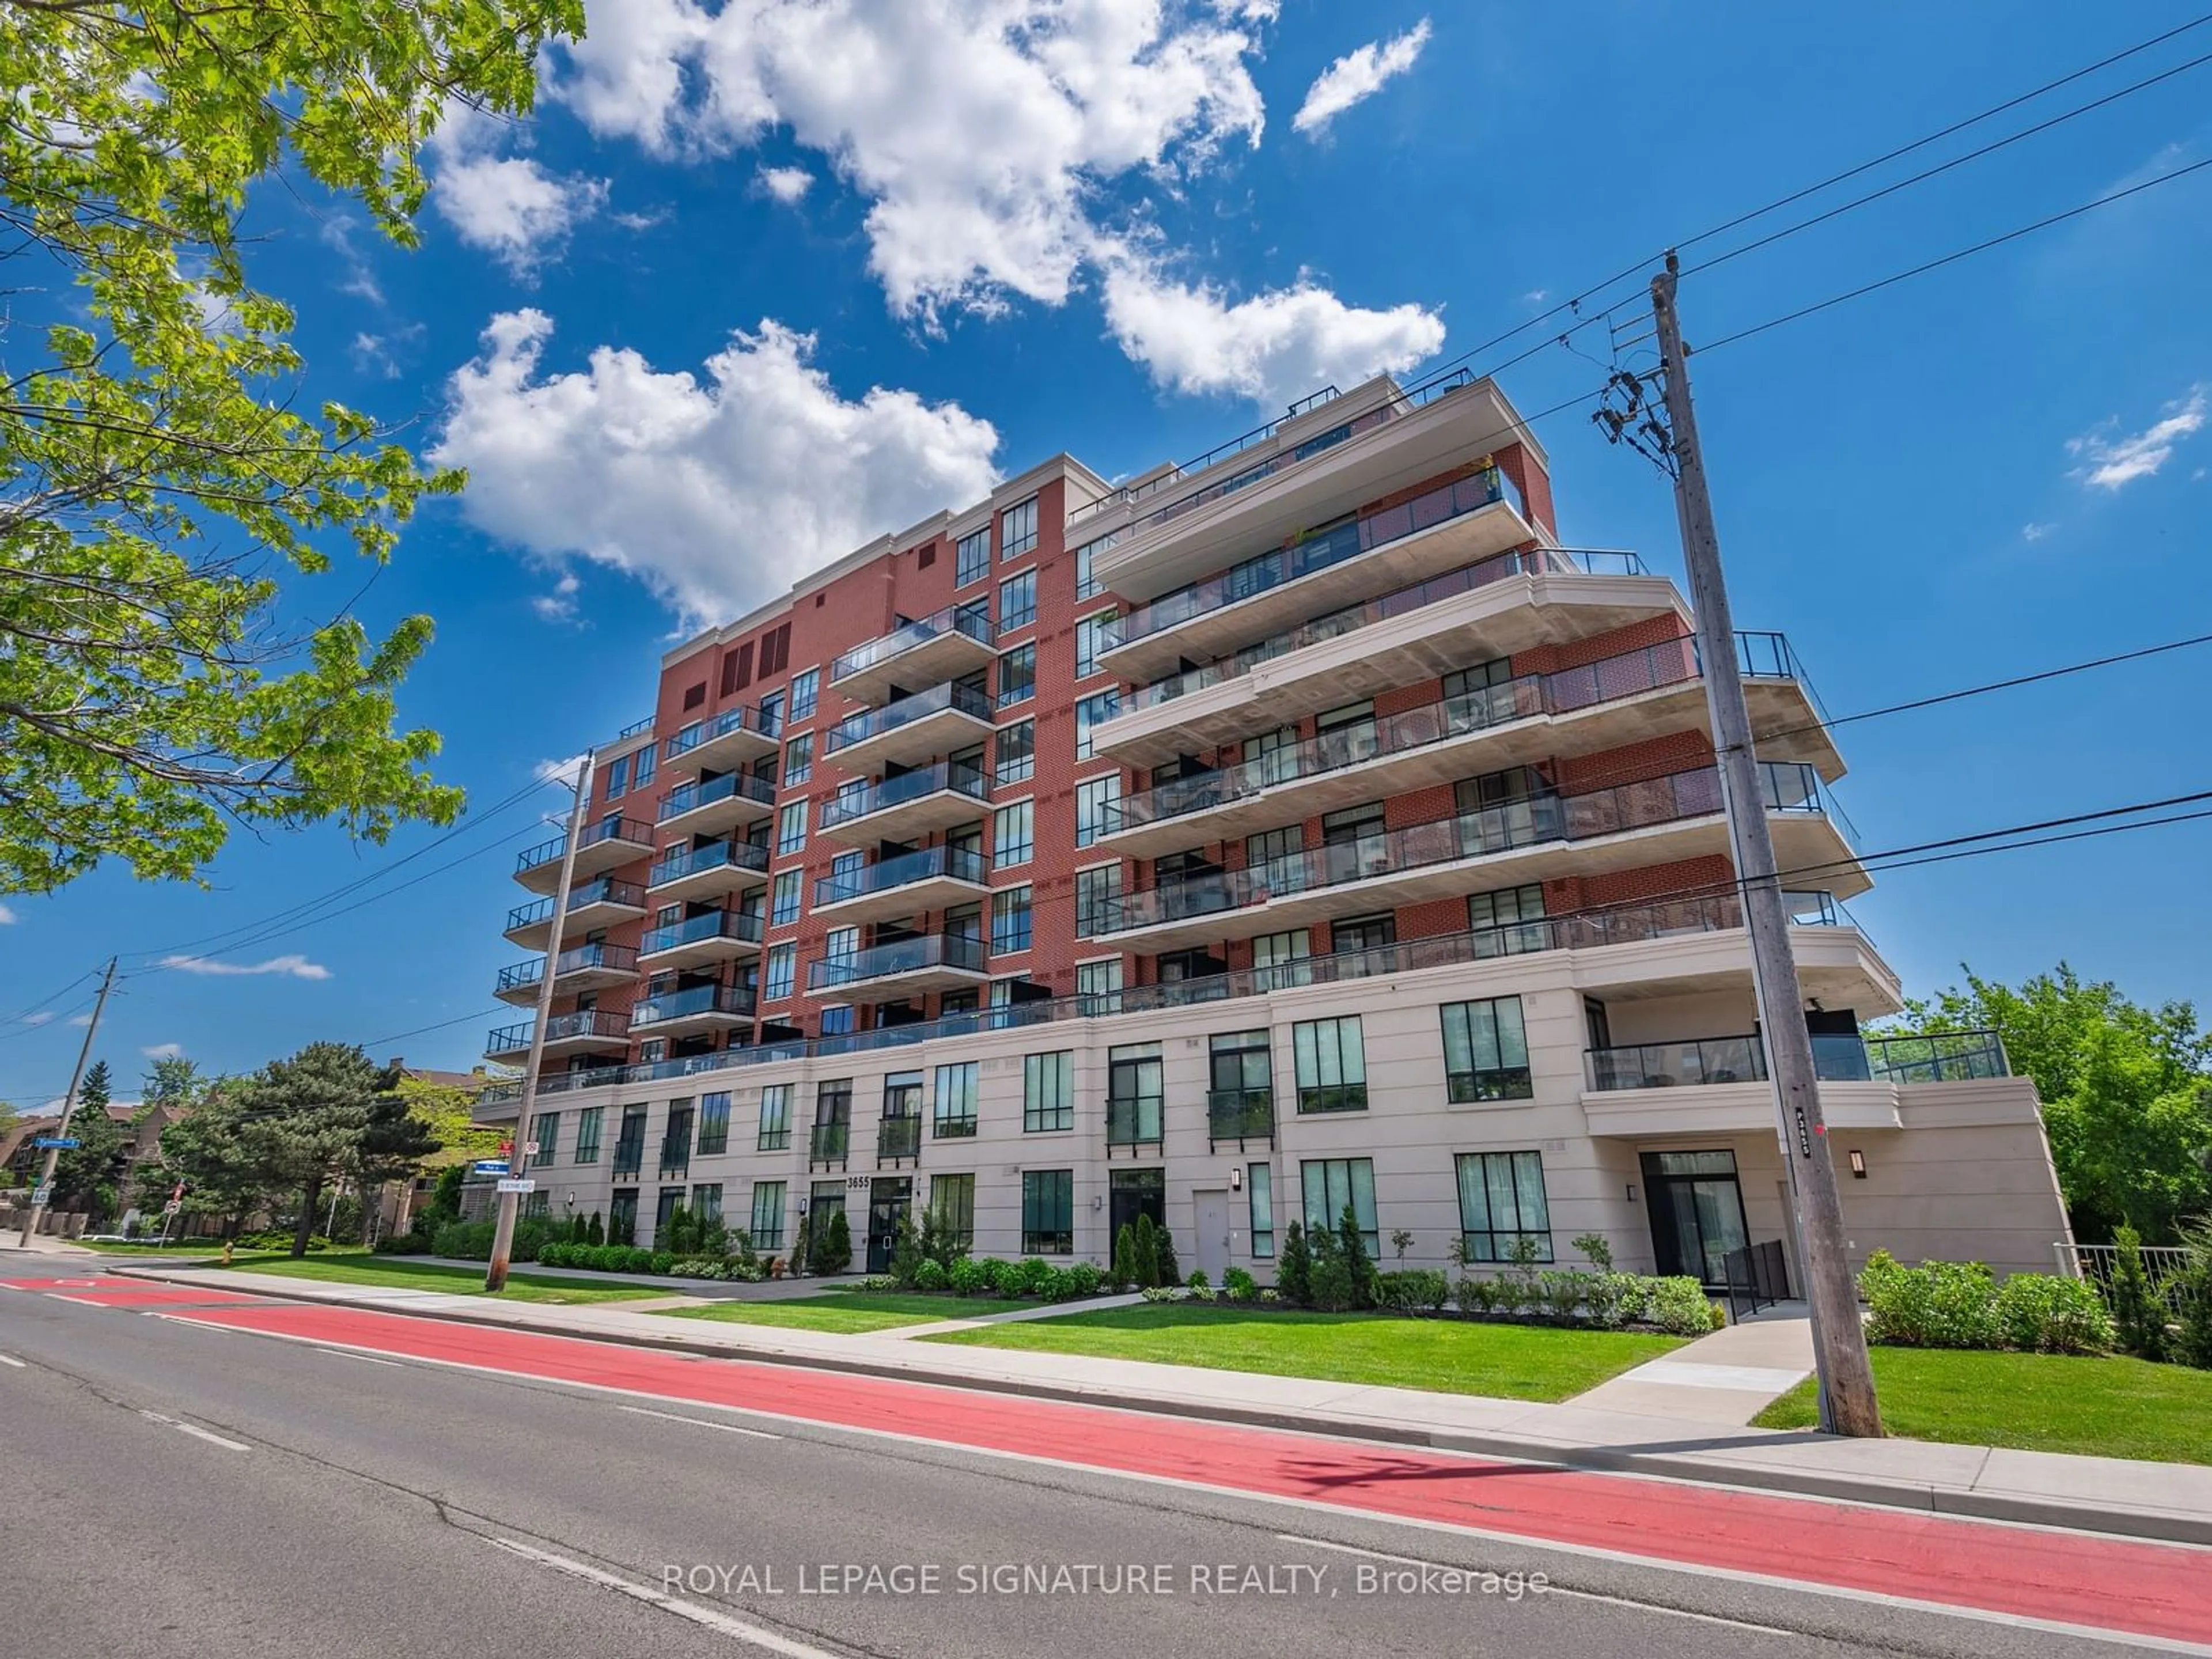 A pic from exterior of the house or condo for 3655 Kingston Rd #318, Toronto Ontario M1M 1S2